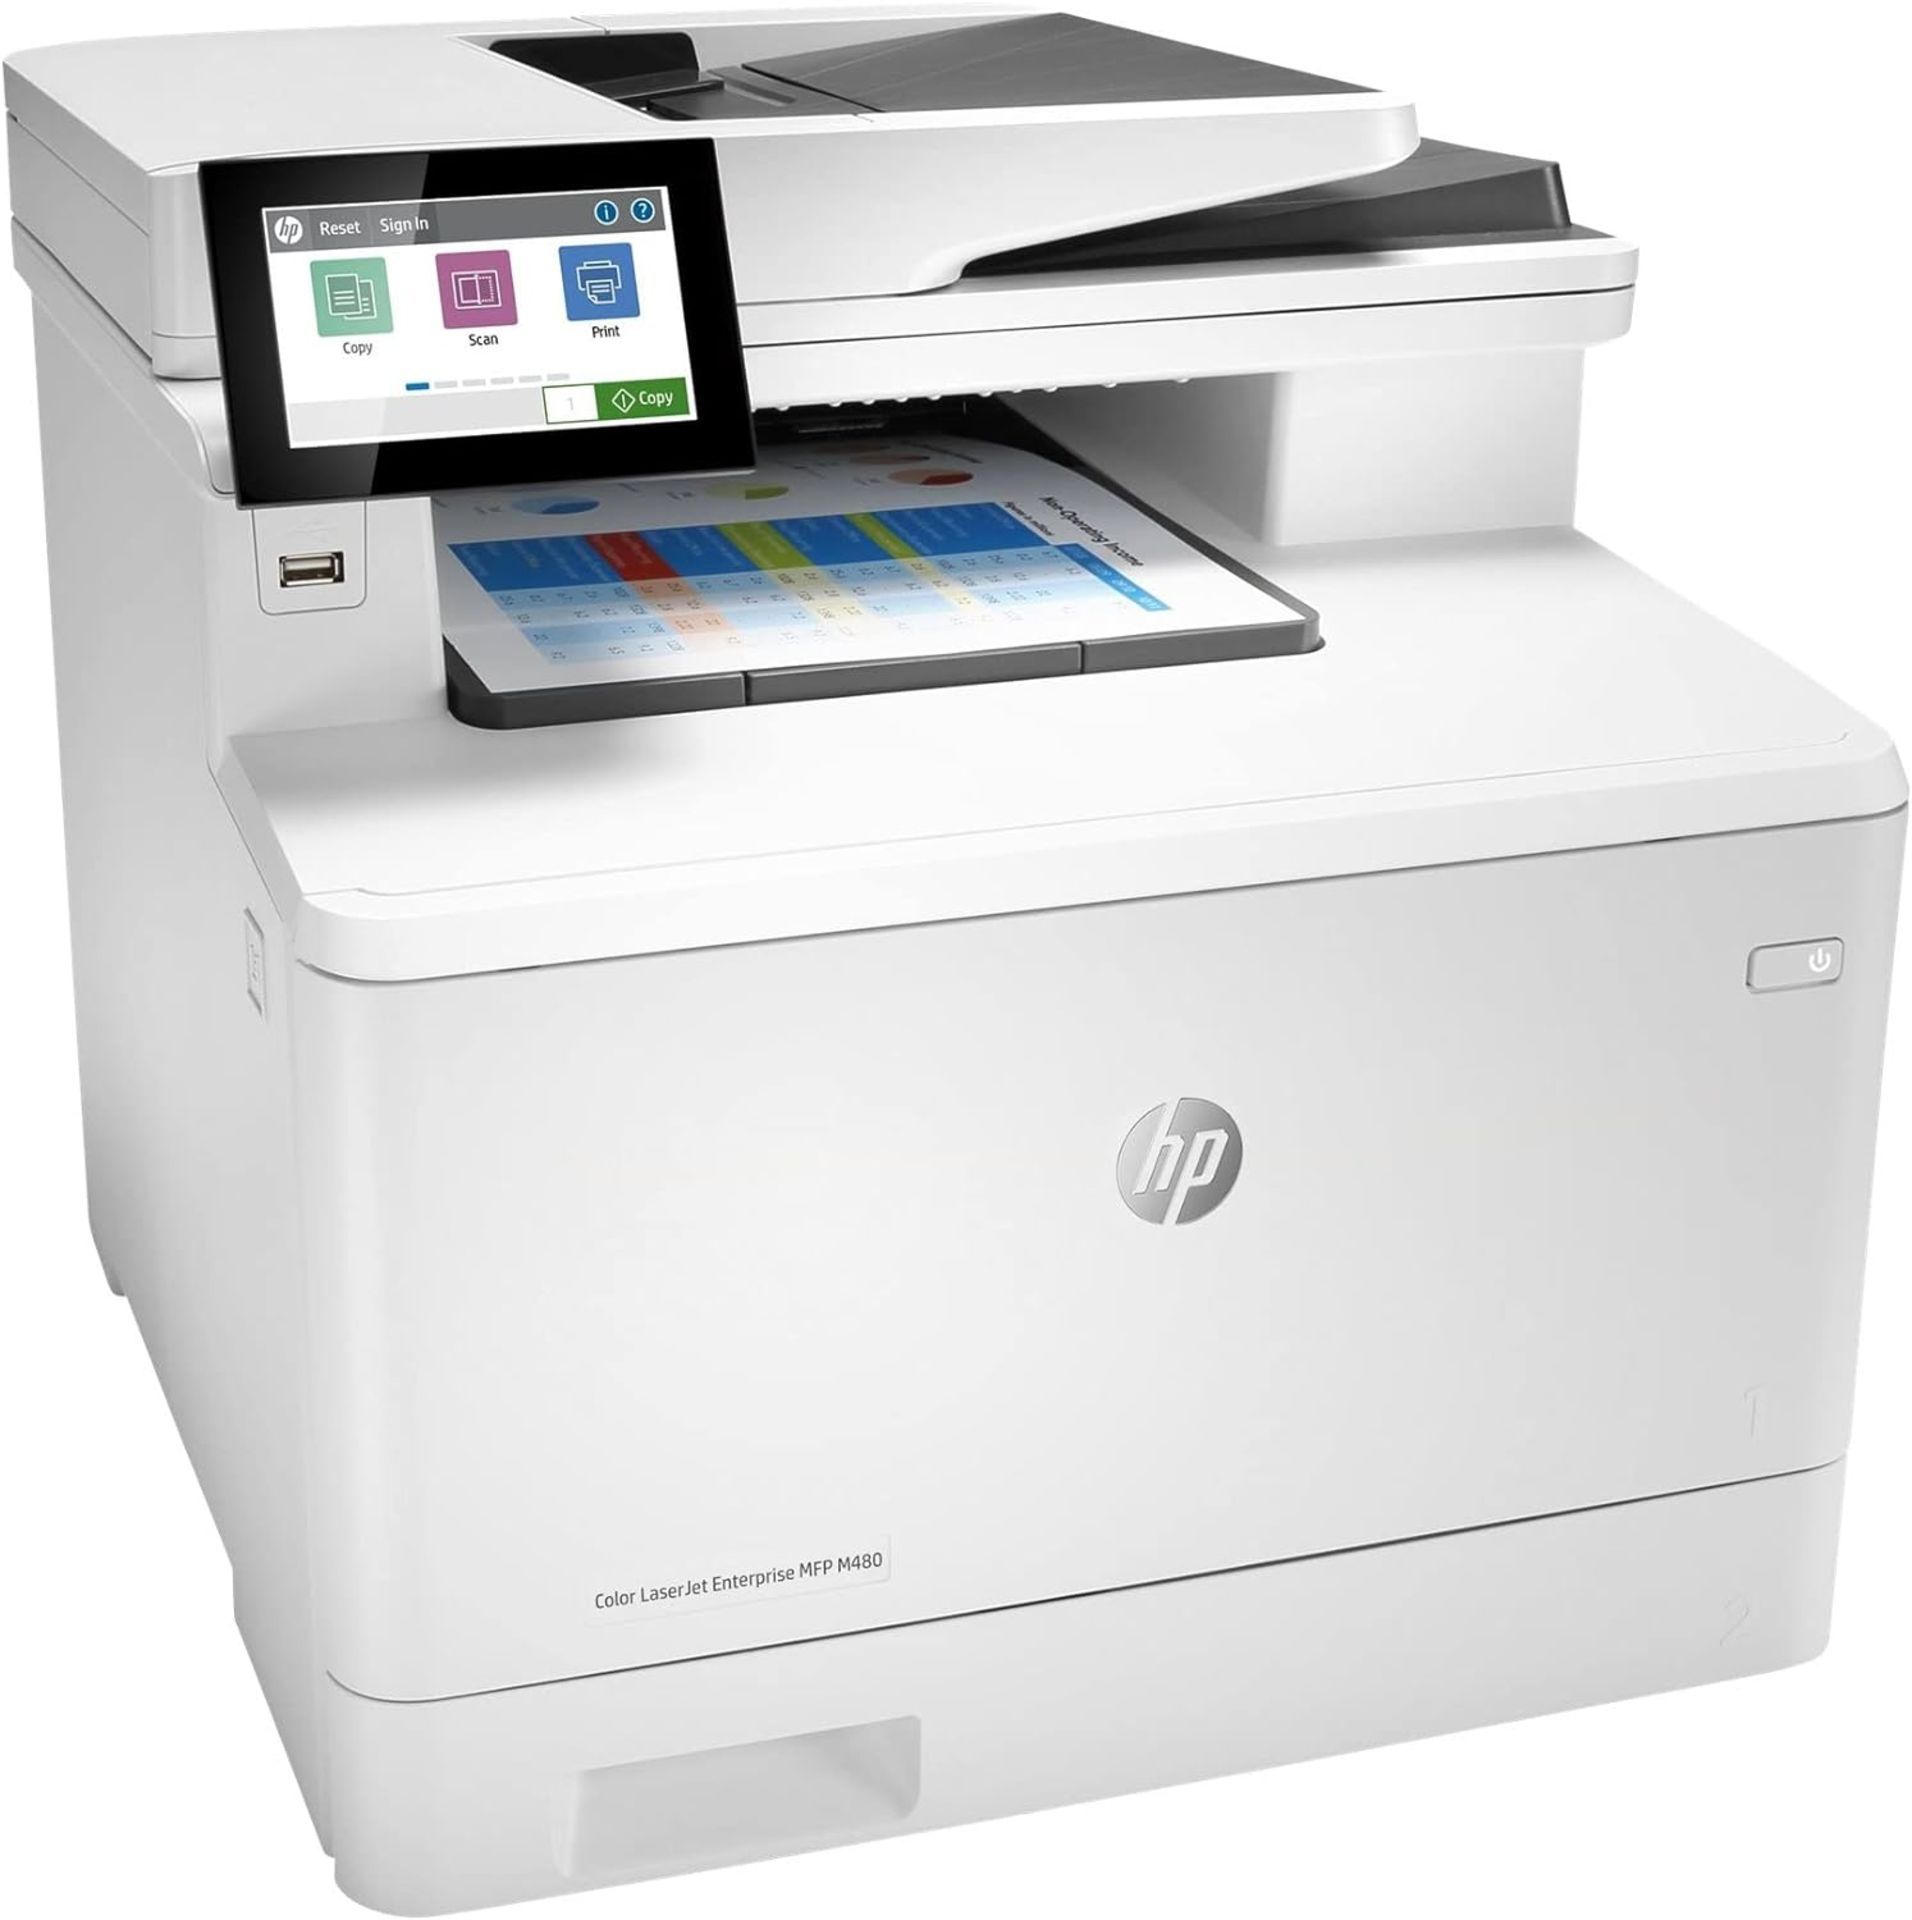 GRADE A HP Color LaserJet Enterprise MFP M480f. RRP £643. (PCK5). This printer is intended for use - Image 2 of 6